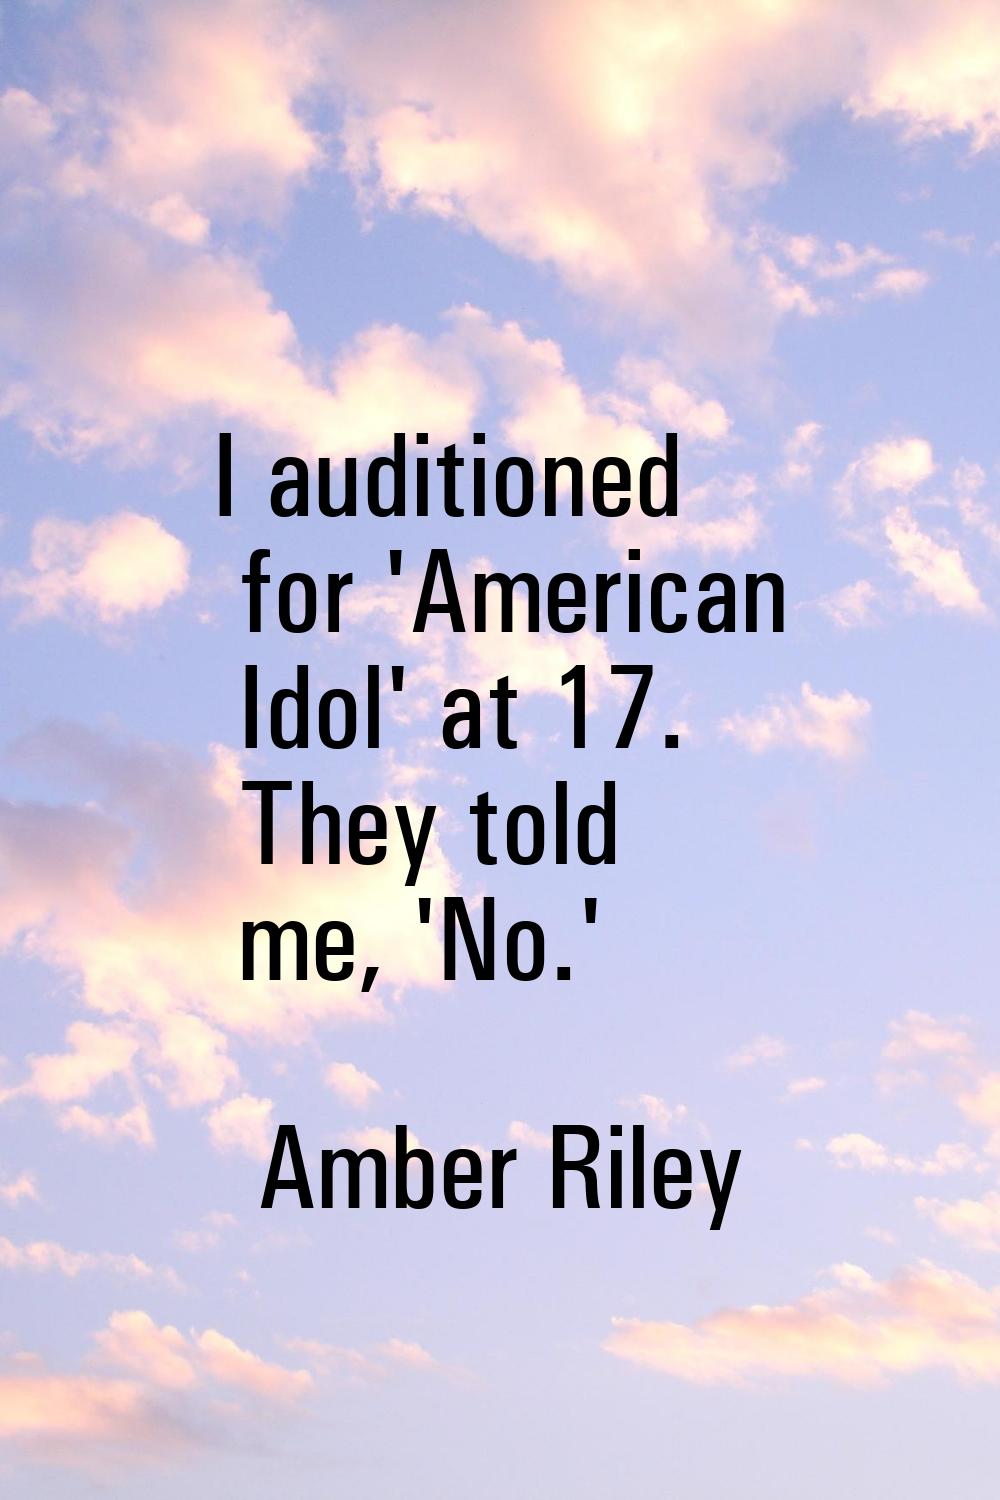 I auditioned for 'American Idol' at 17. They told me, 'No.'